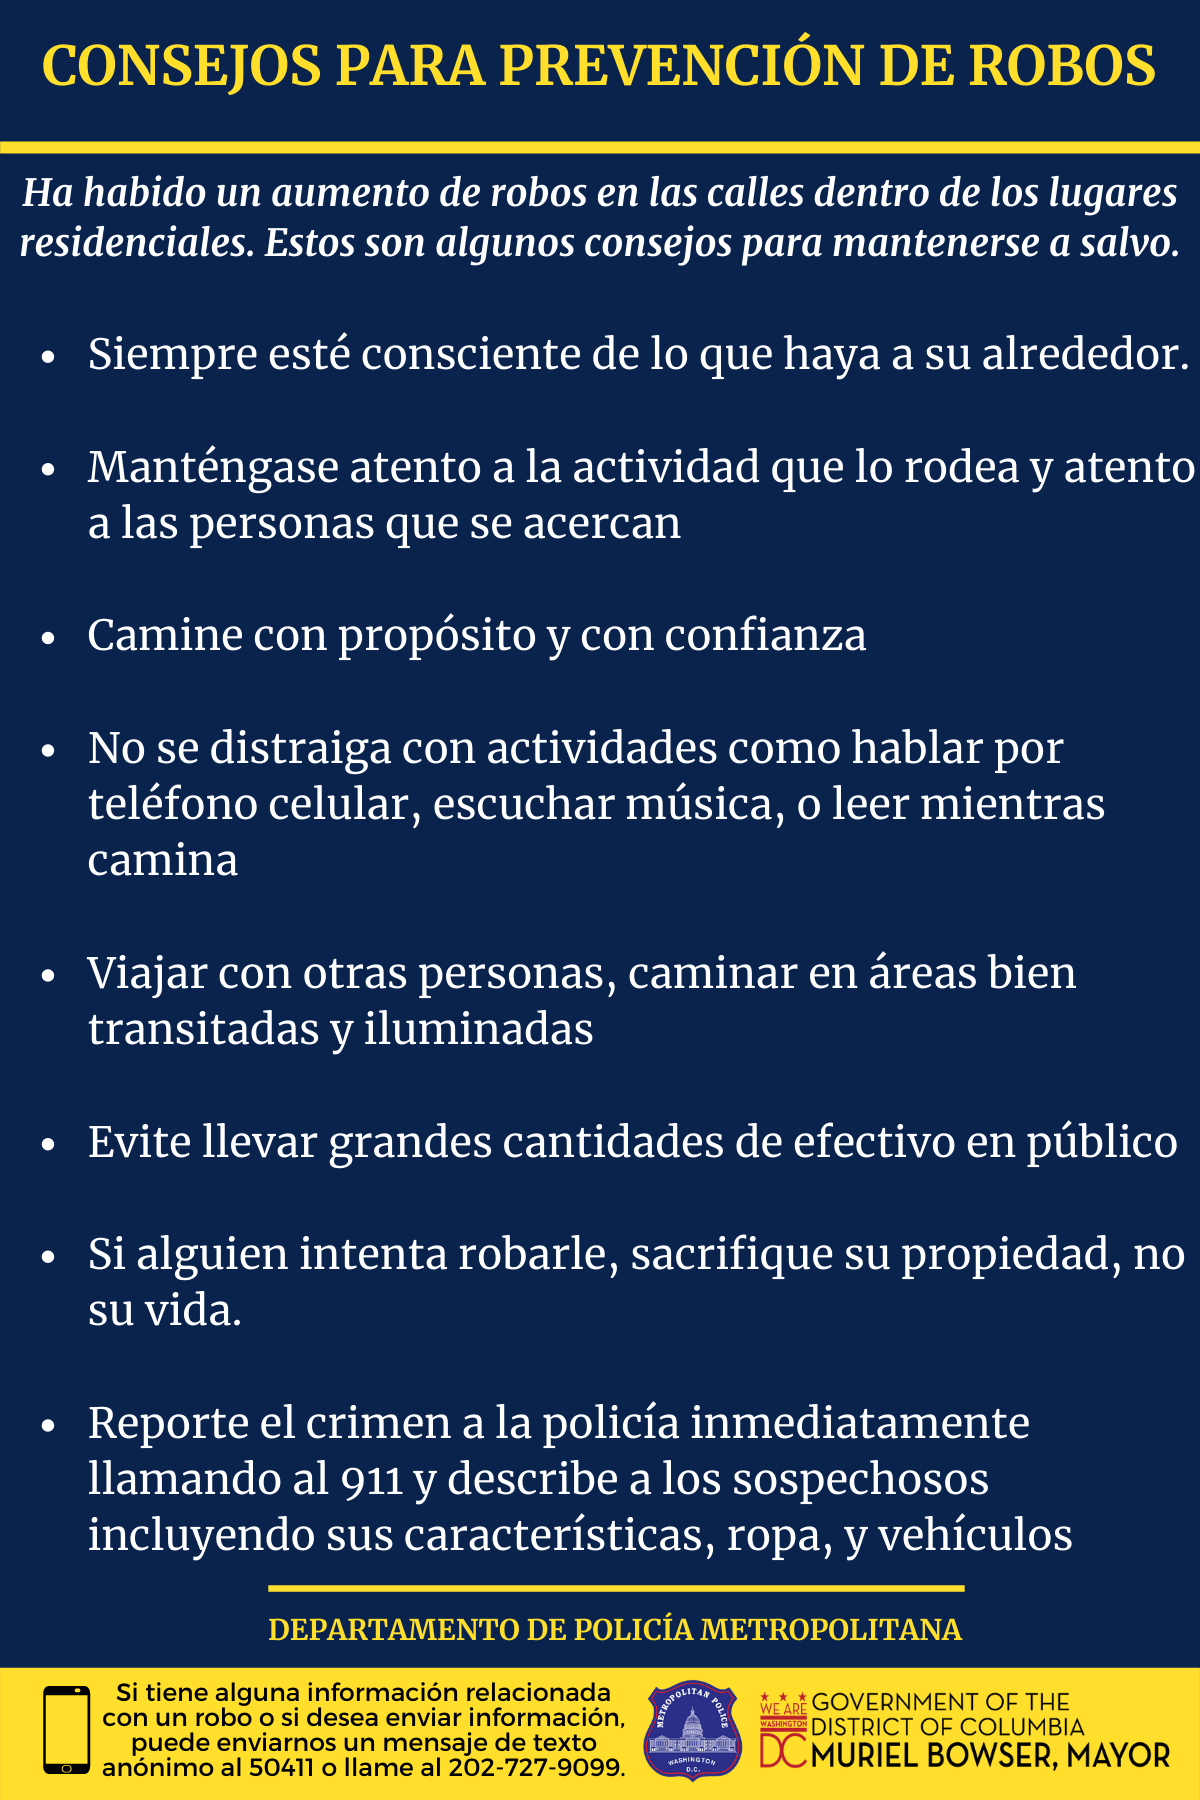 Robbery Prevention Tips (Spanish) 10.28.21.png